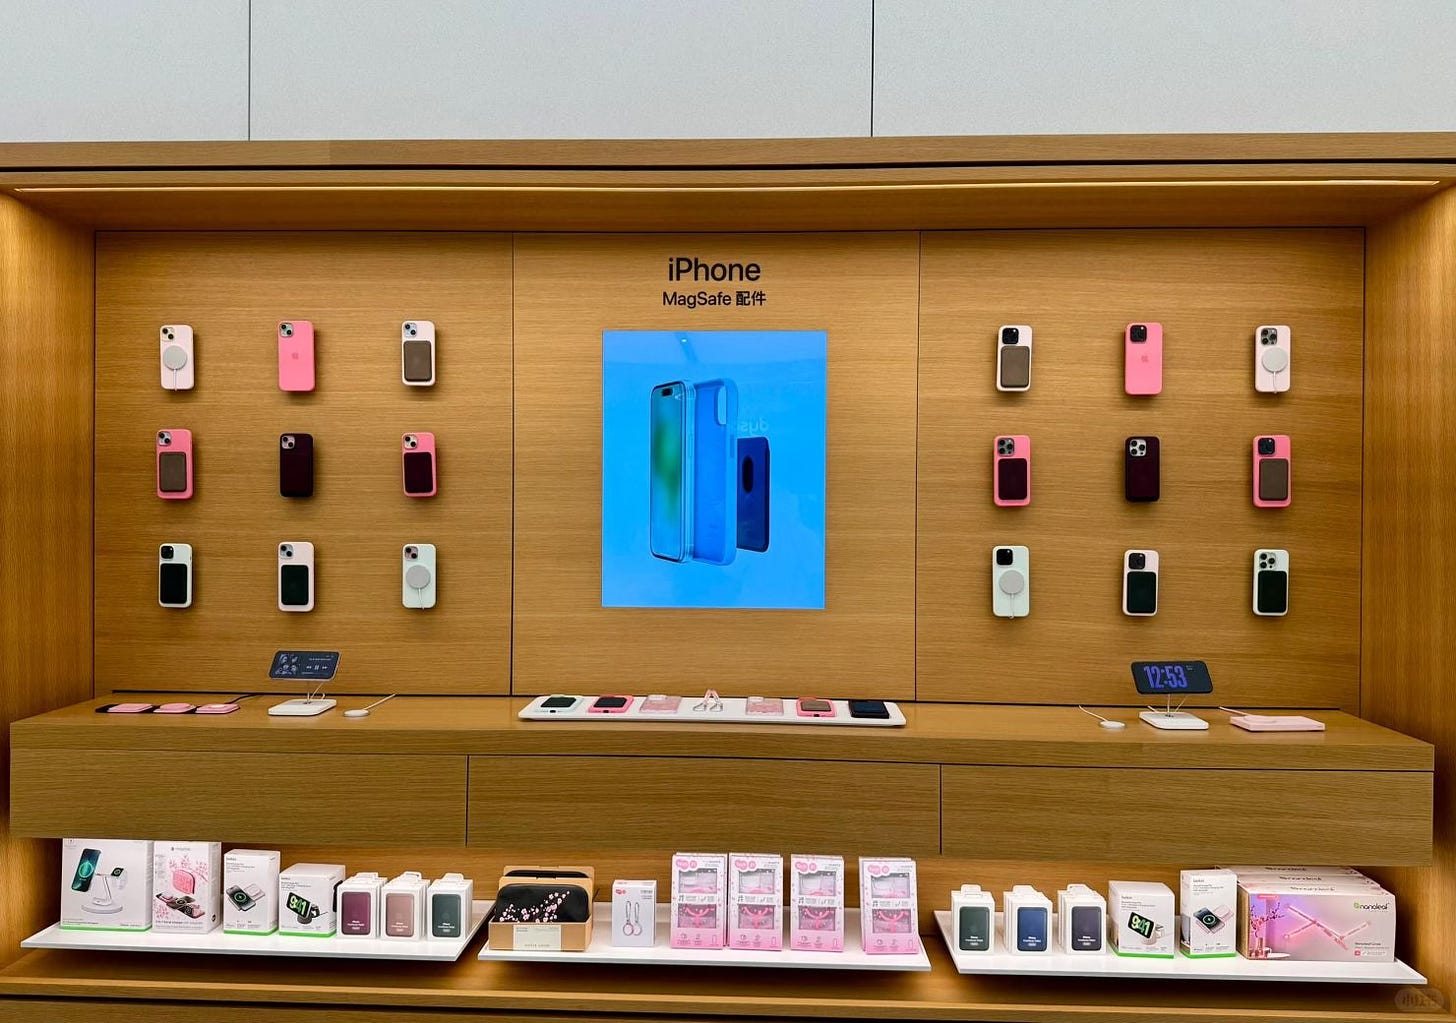 An iPhone MagSafe accessory bay merchandised with pink cherry blossom accessories.